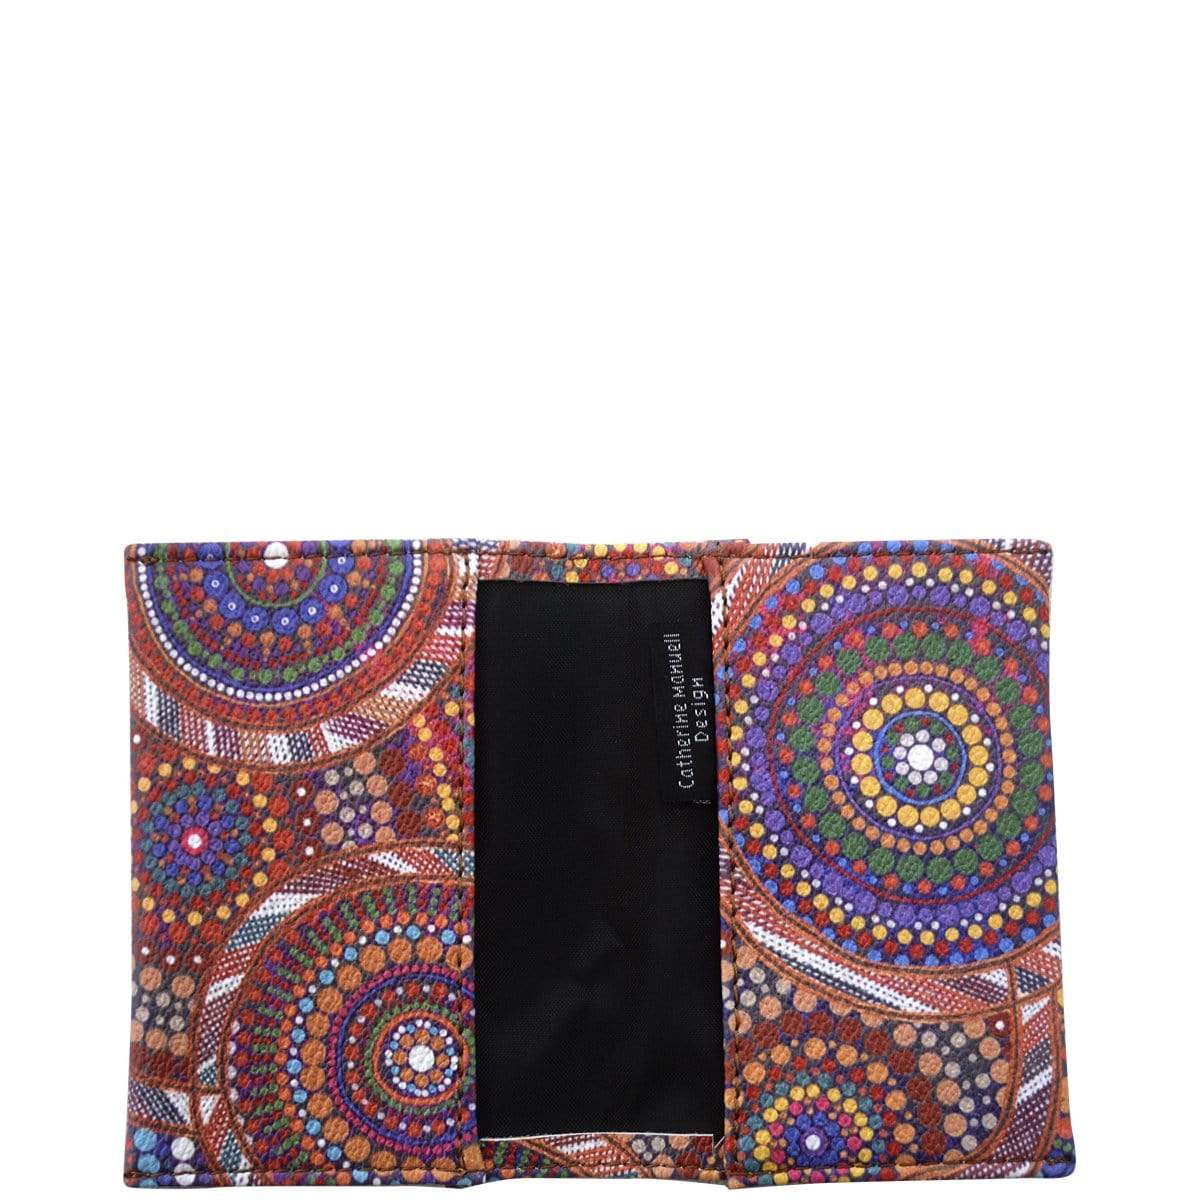 Card Sleeve - Community Unity by Catherine Manuell Designs